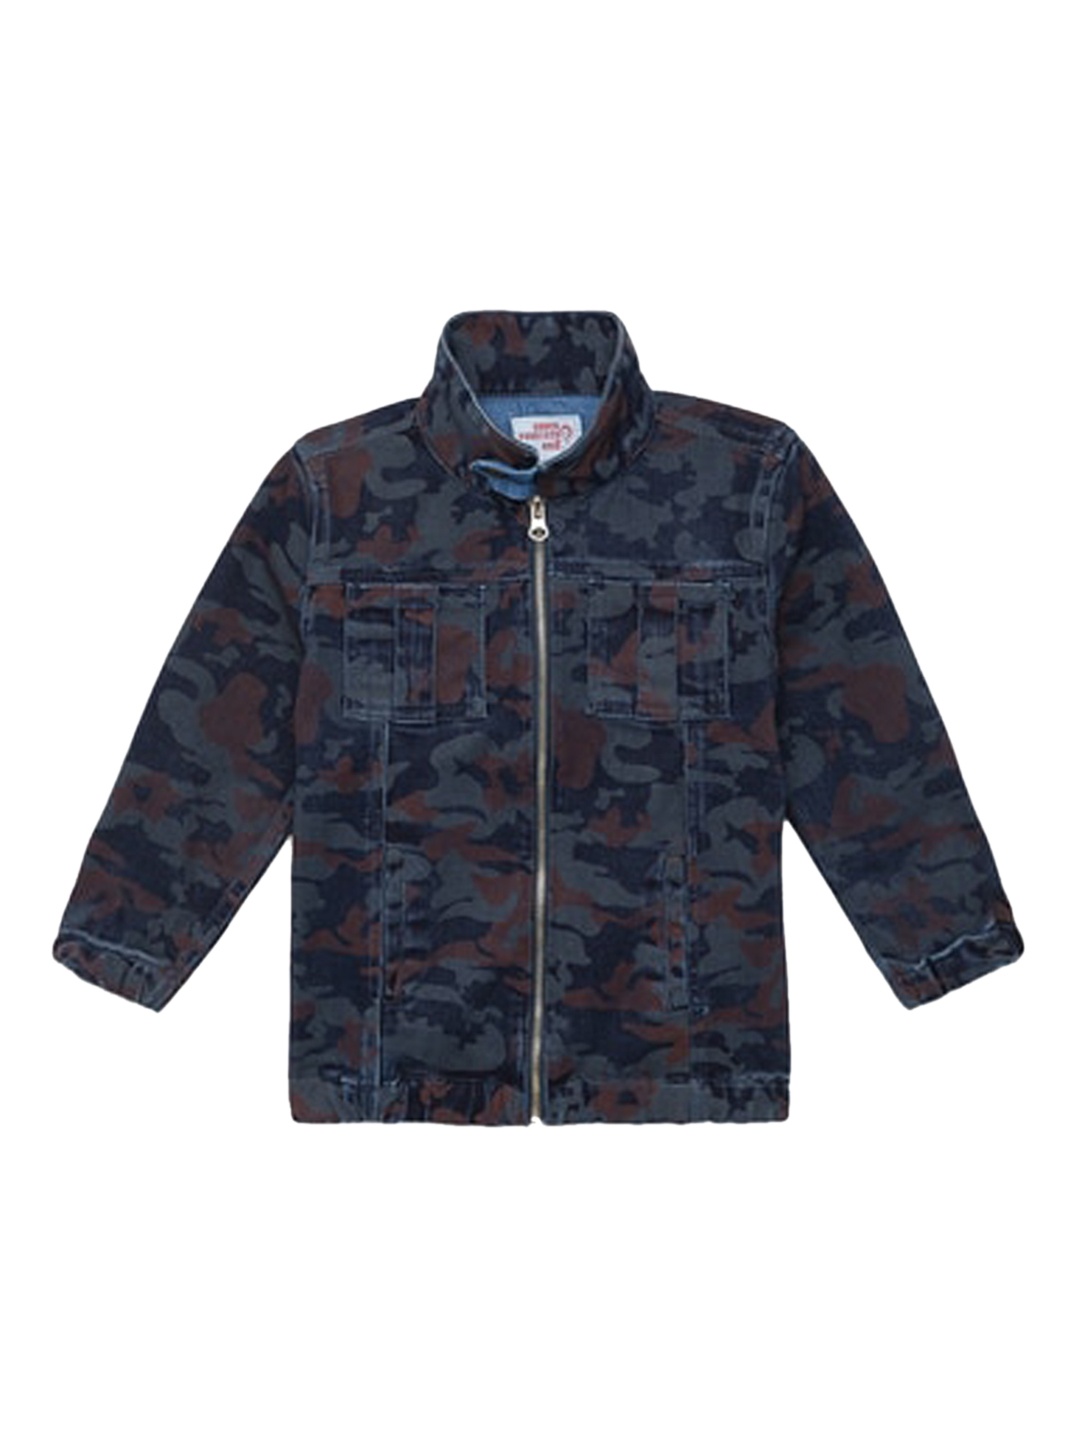 

UNDER FOURTEEN ONLY Boys Navy Blue & Brown Camouflage Printed Tailored Jacket